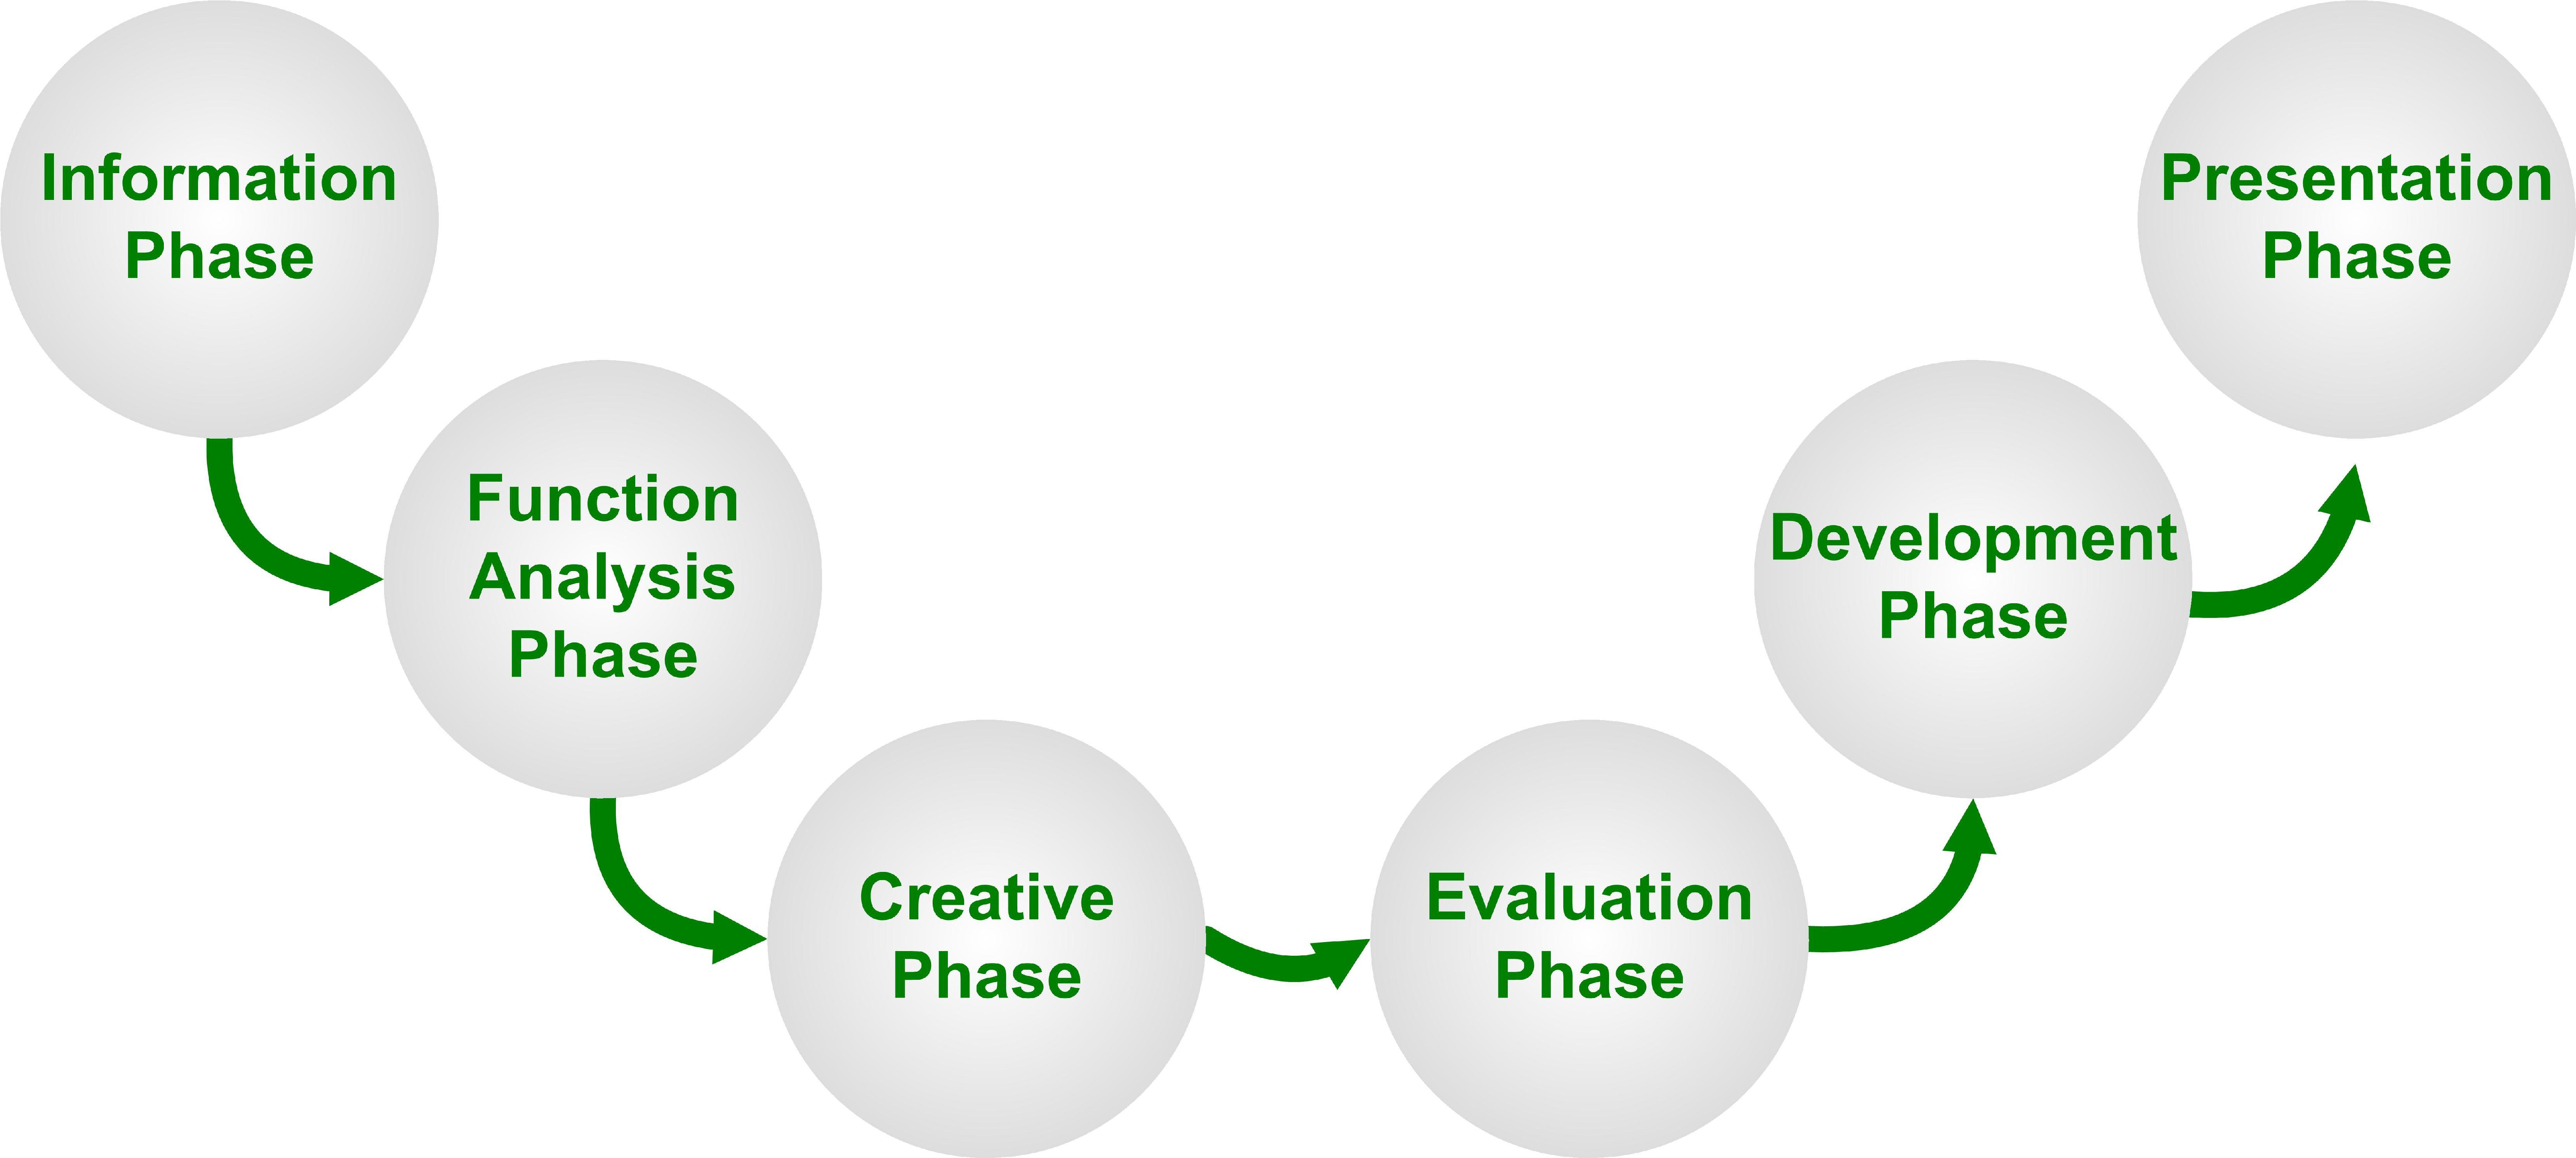 Value Analysis Job Plan Image showing the following six phases: Information phase, Function Analysis phase, Creative phase, Evaluation phase, Development phase, Presentation phase.